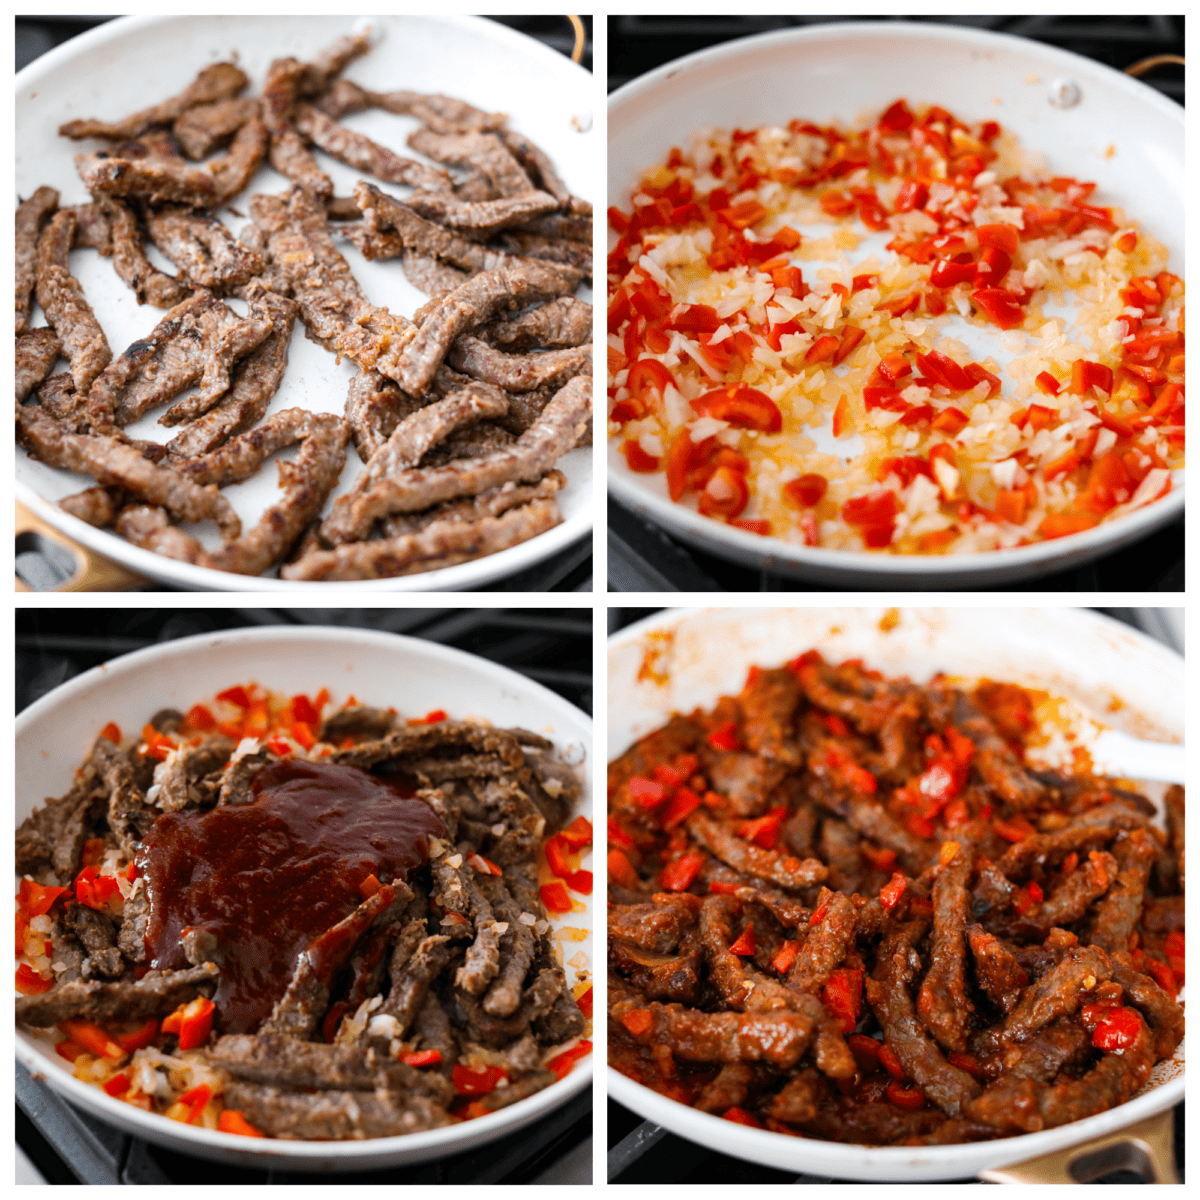 First photo of beef frying in a pan. Second photo of the peppers and onions cooking in a pan. Third photo of the beef, vegetables, and sauce in the pan. Fourth photo of the beef, vegetables, and sauce tossed together.